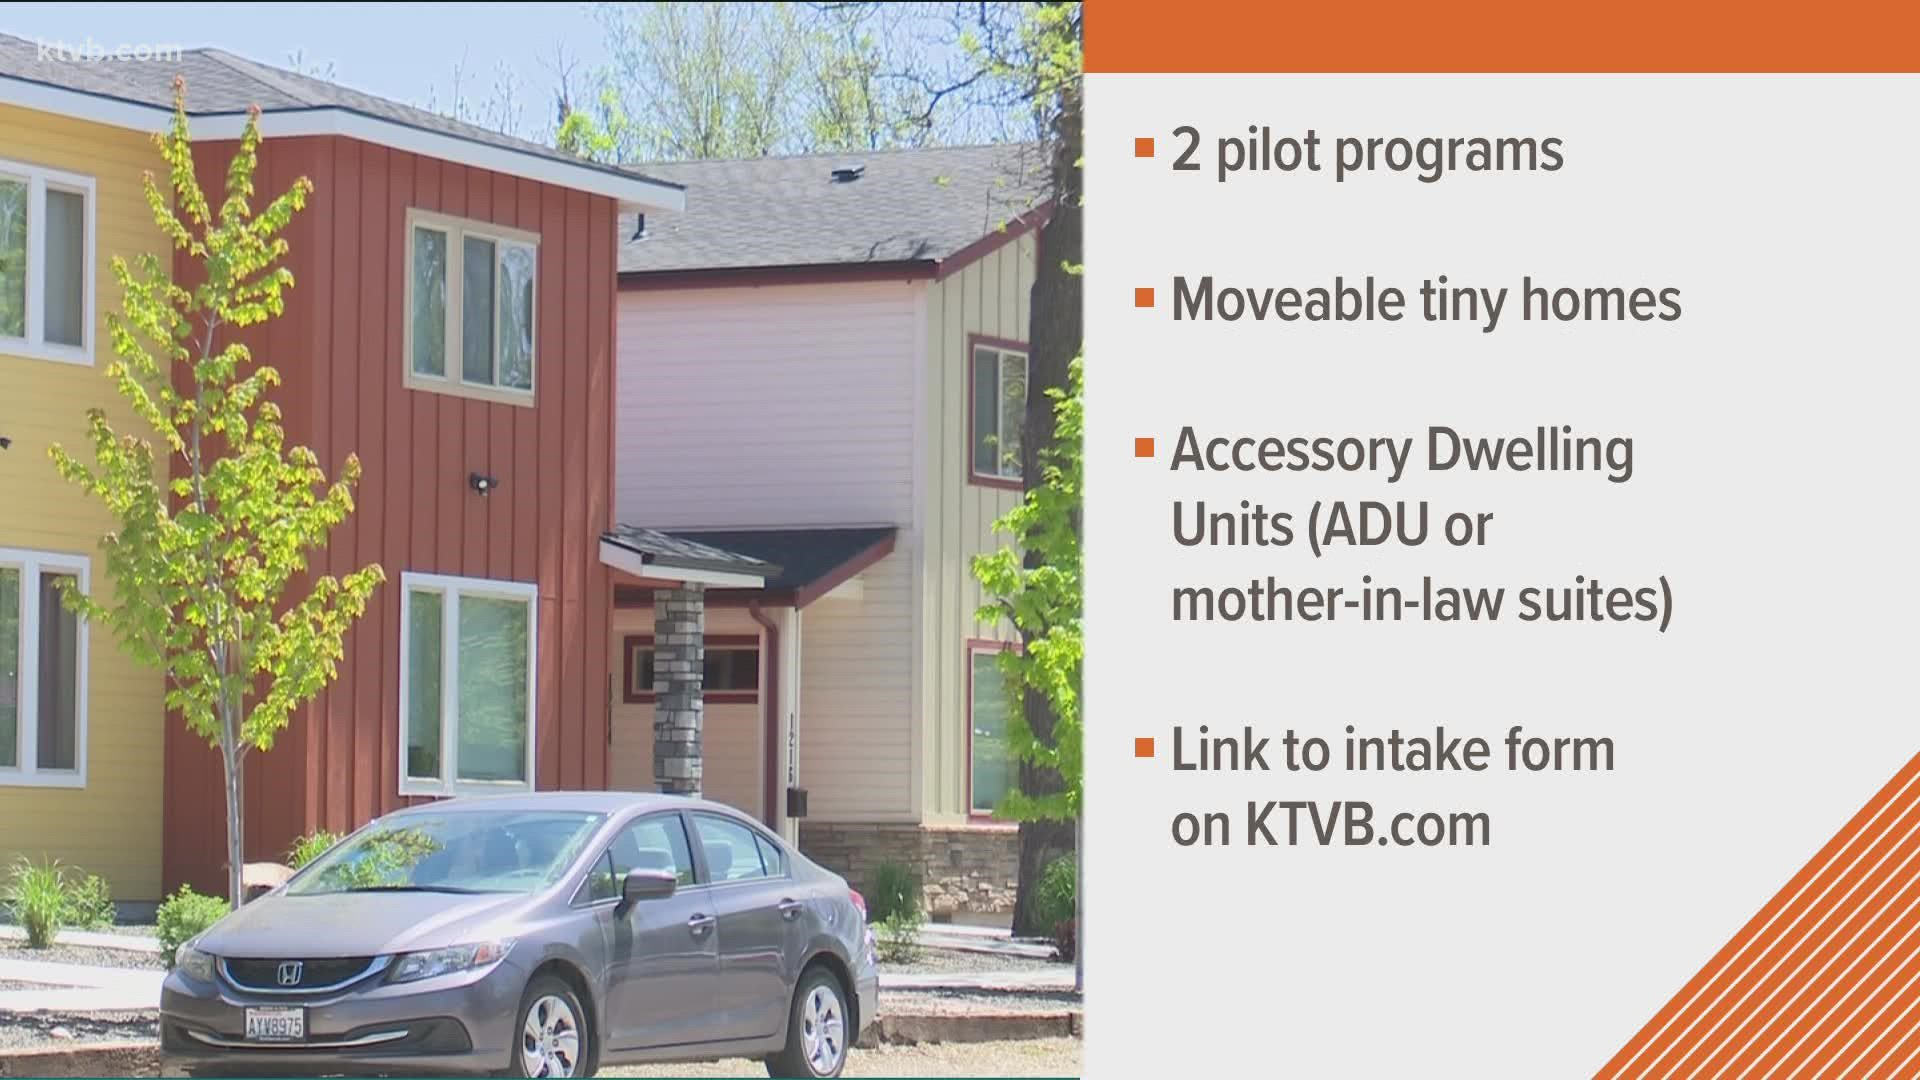 Boise and LEAP Housing will select households to participate in the programs to determine whether moveable tiny homes and ADUs are affordable housing solutions.